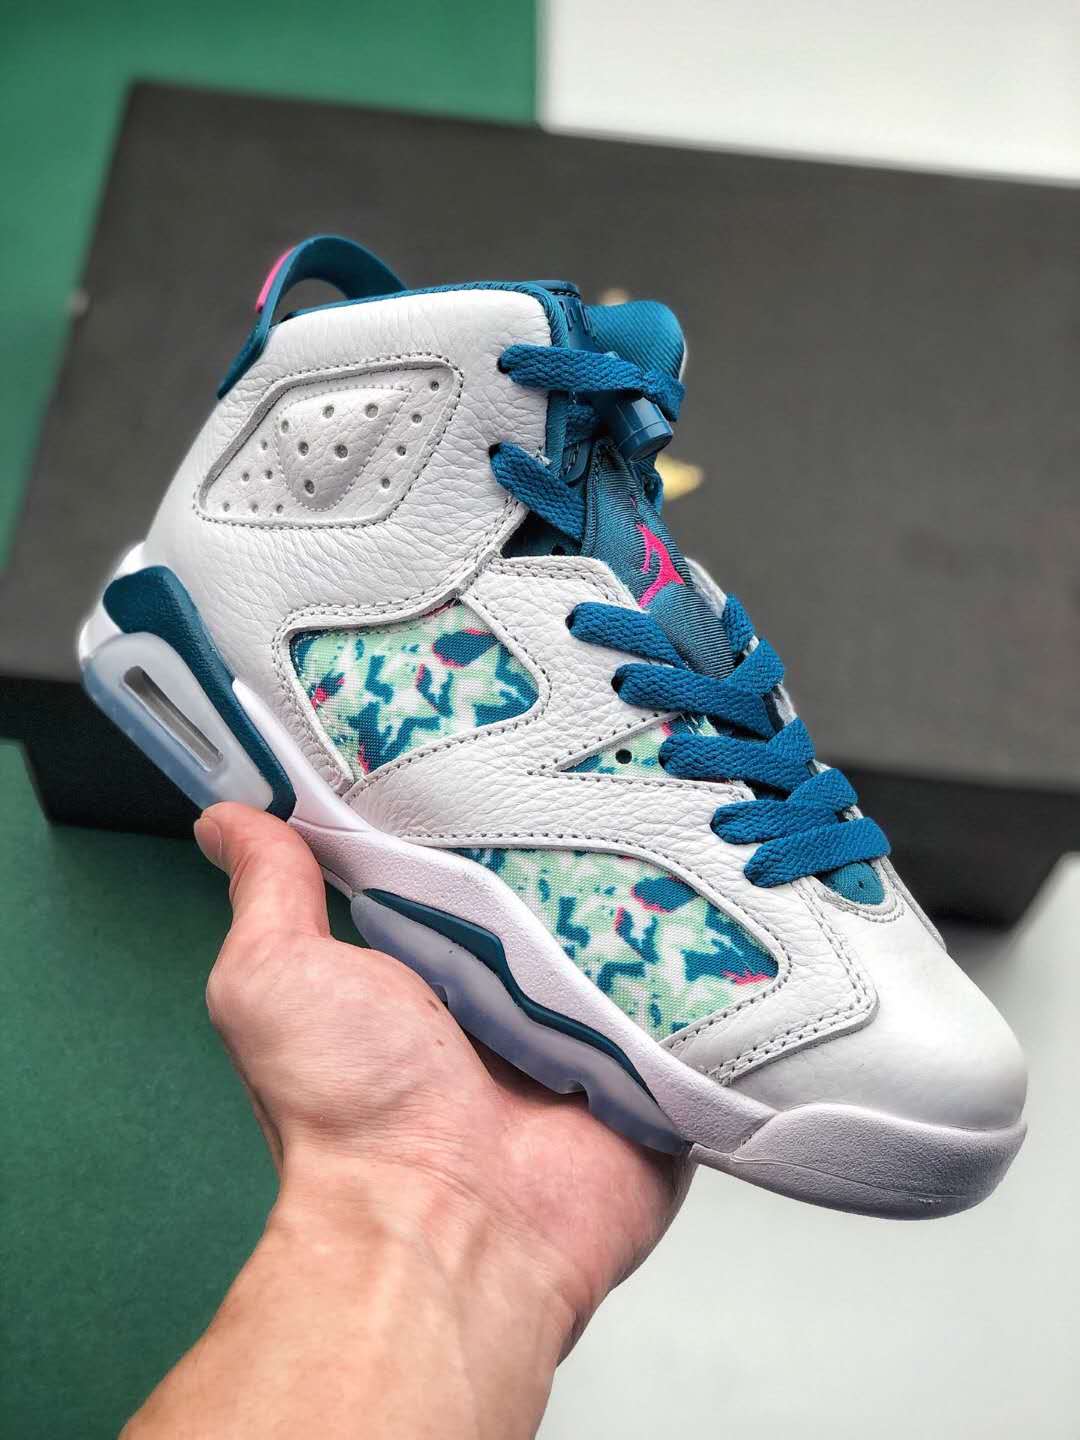 Air Jordan 6 Retro 'Green Abyss' 543390-153 - Unveiling the Iconic Design